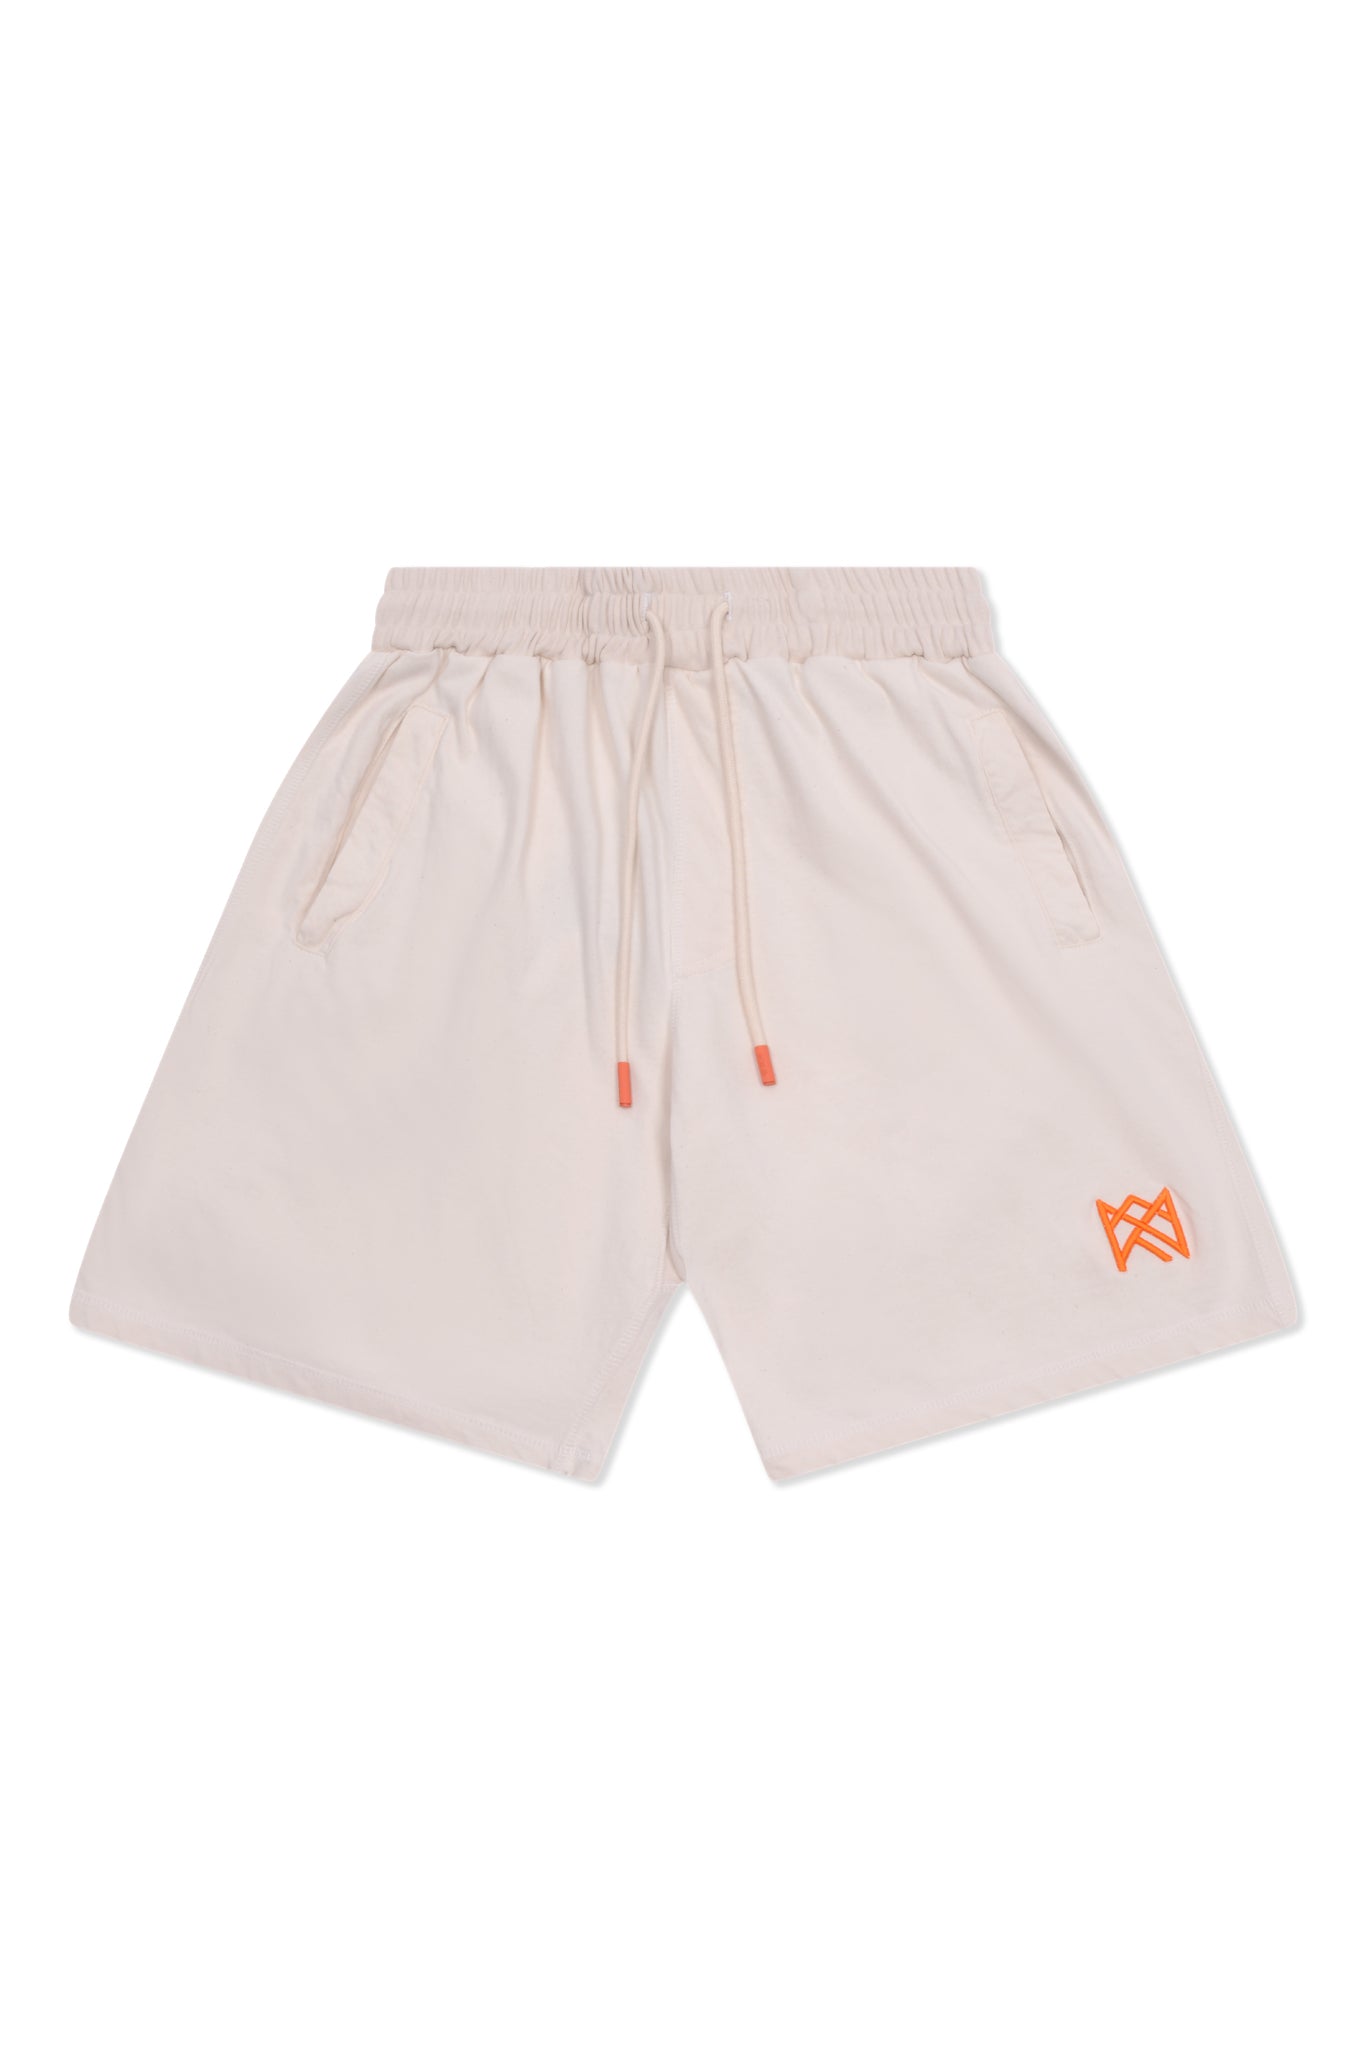 Heir Oversized Shorts Off White - RealArtisticPeople